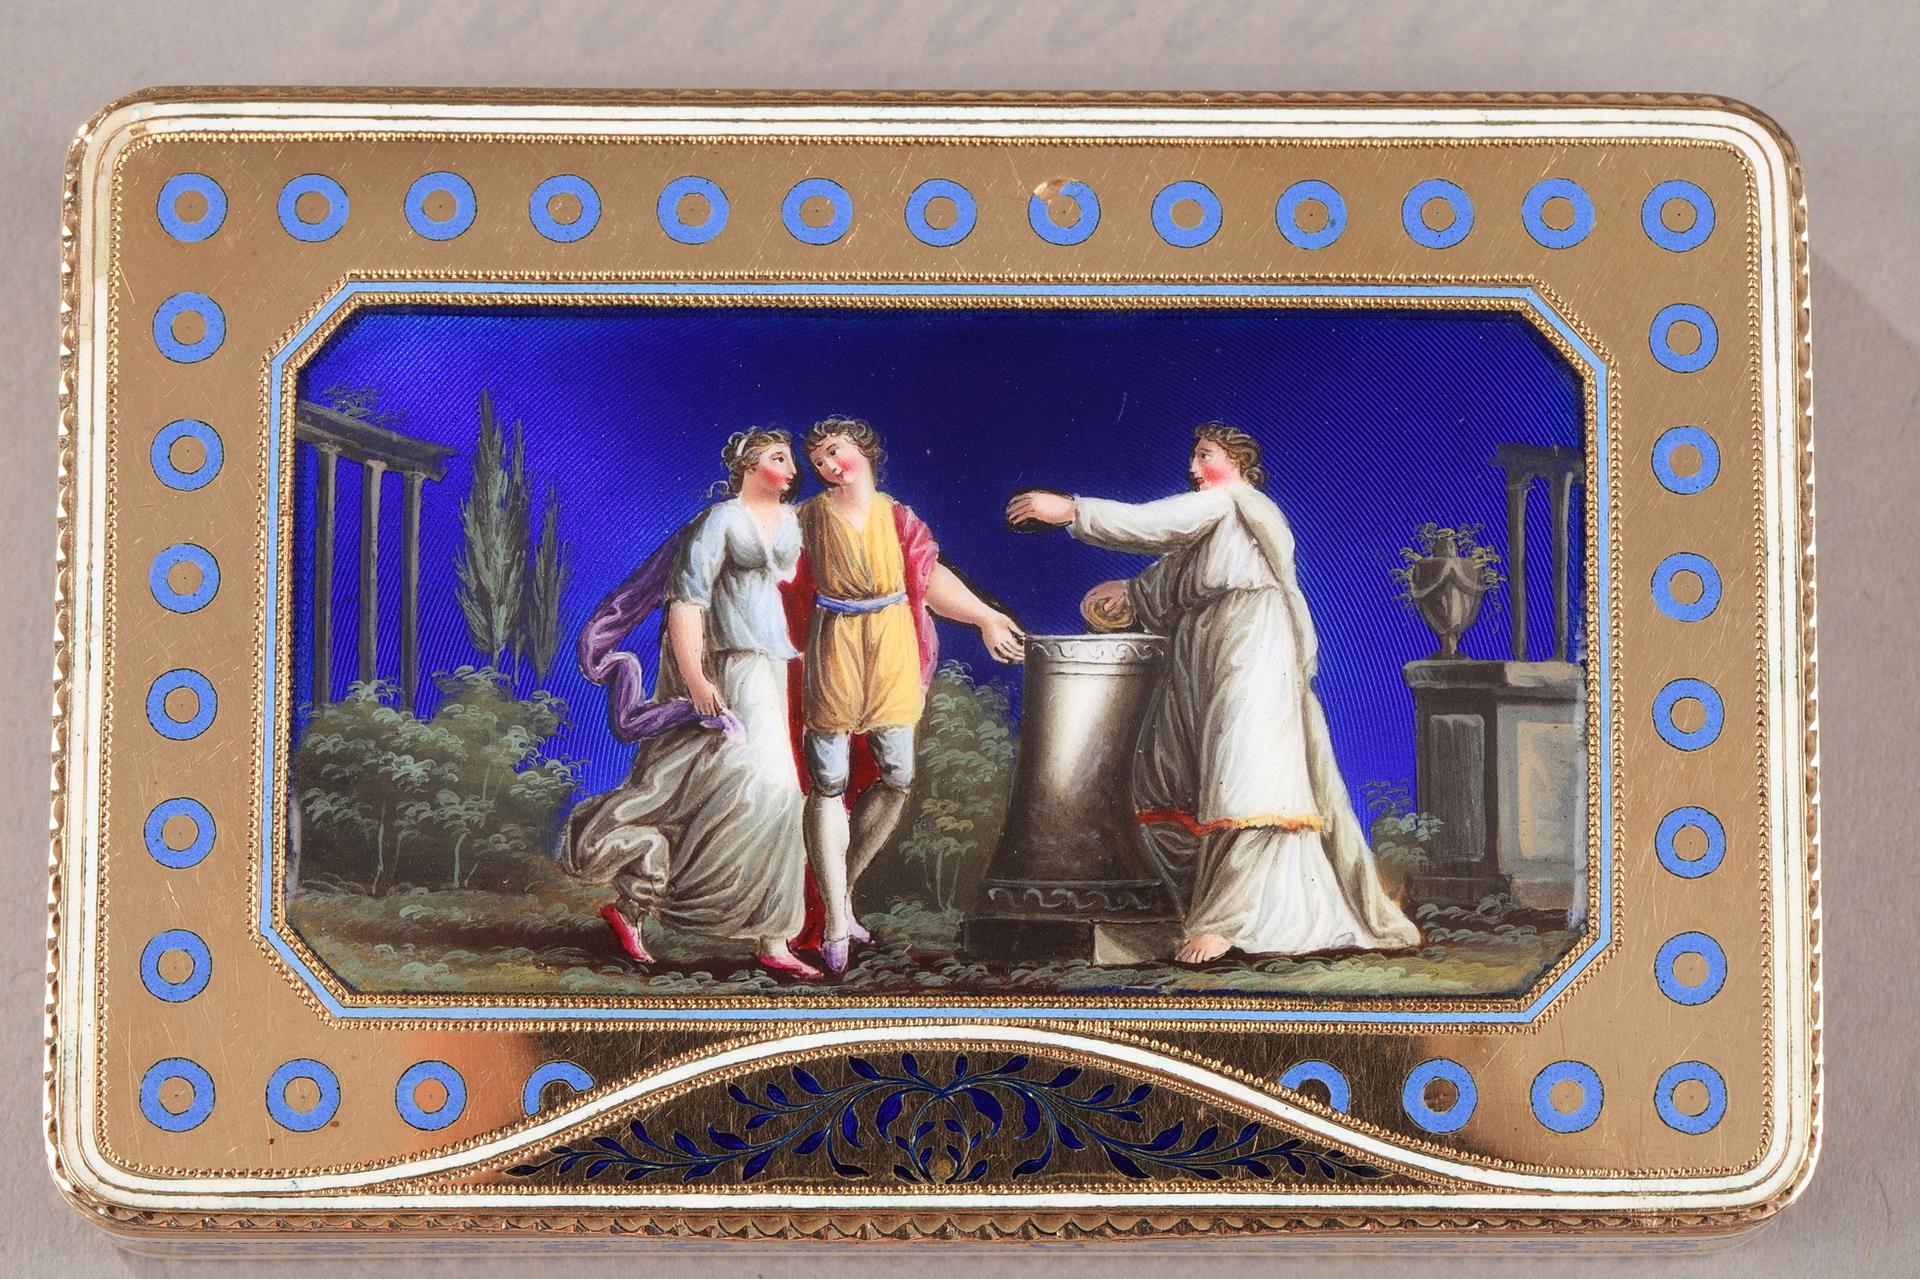 Enamelled gold Swiss box. Late 18th century.